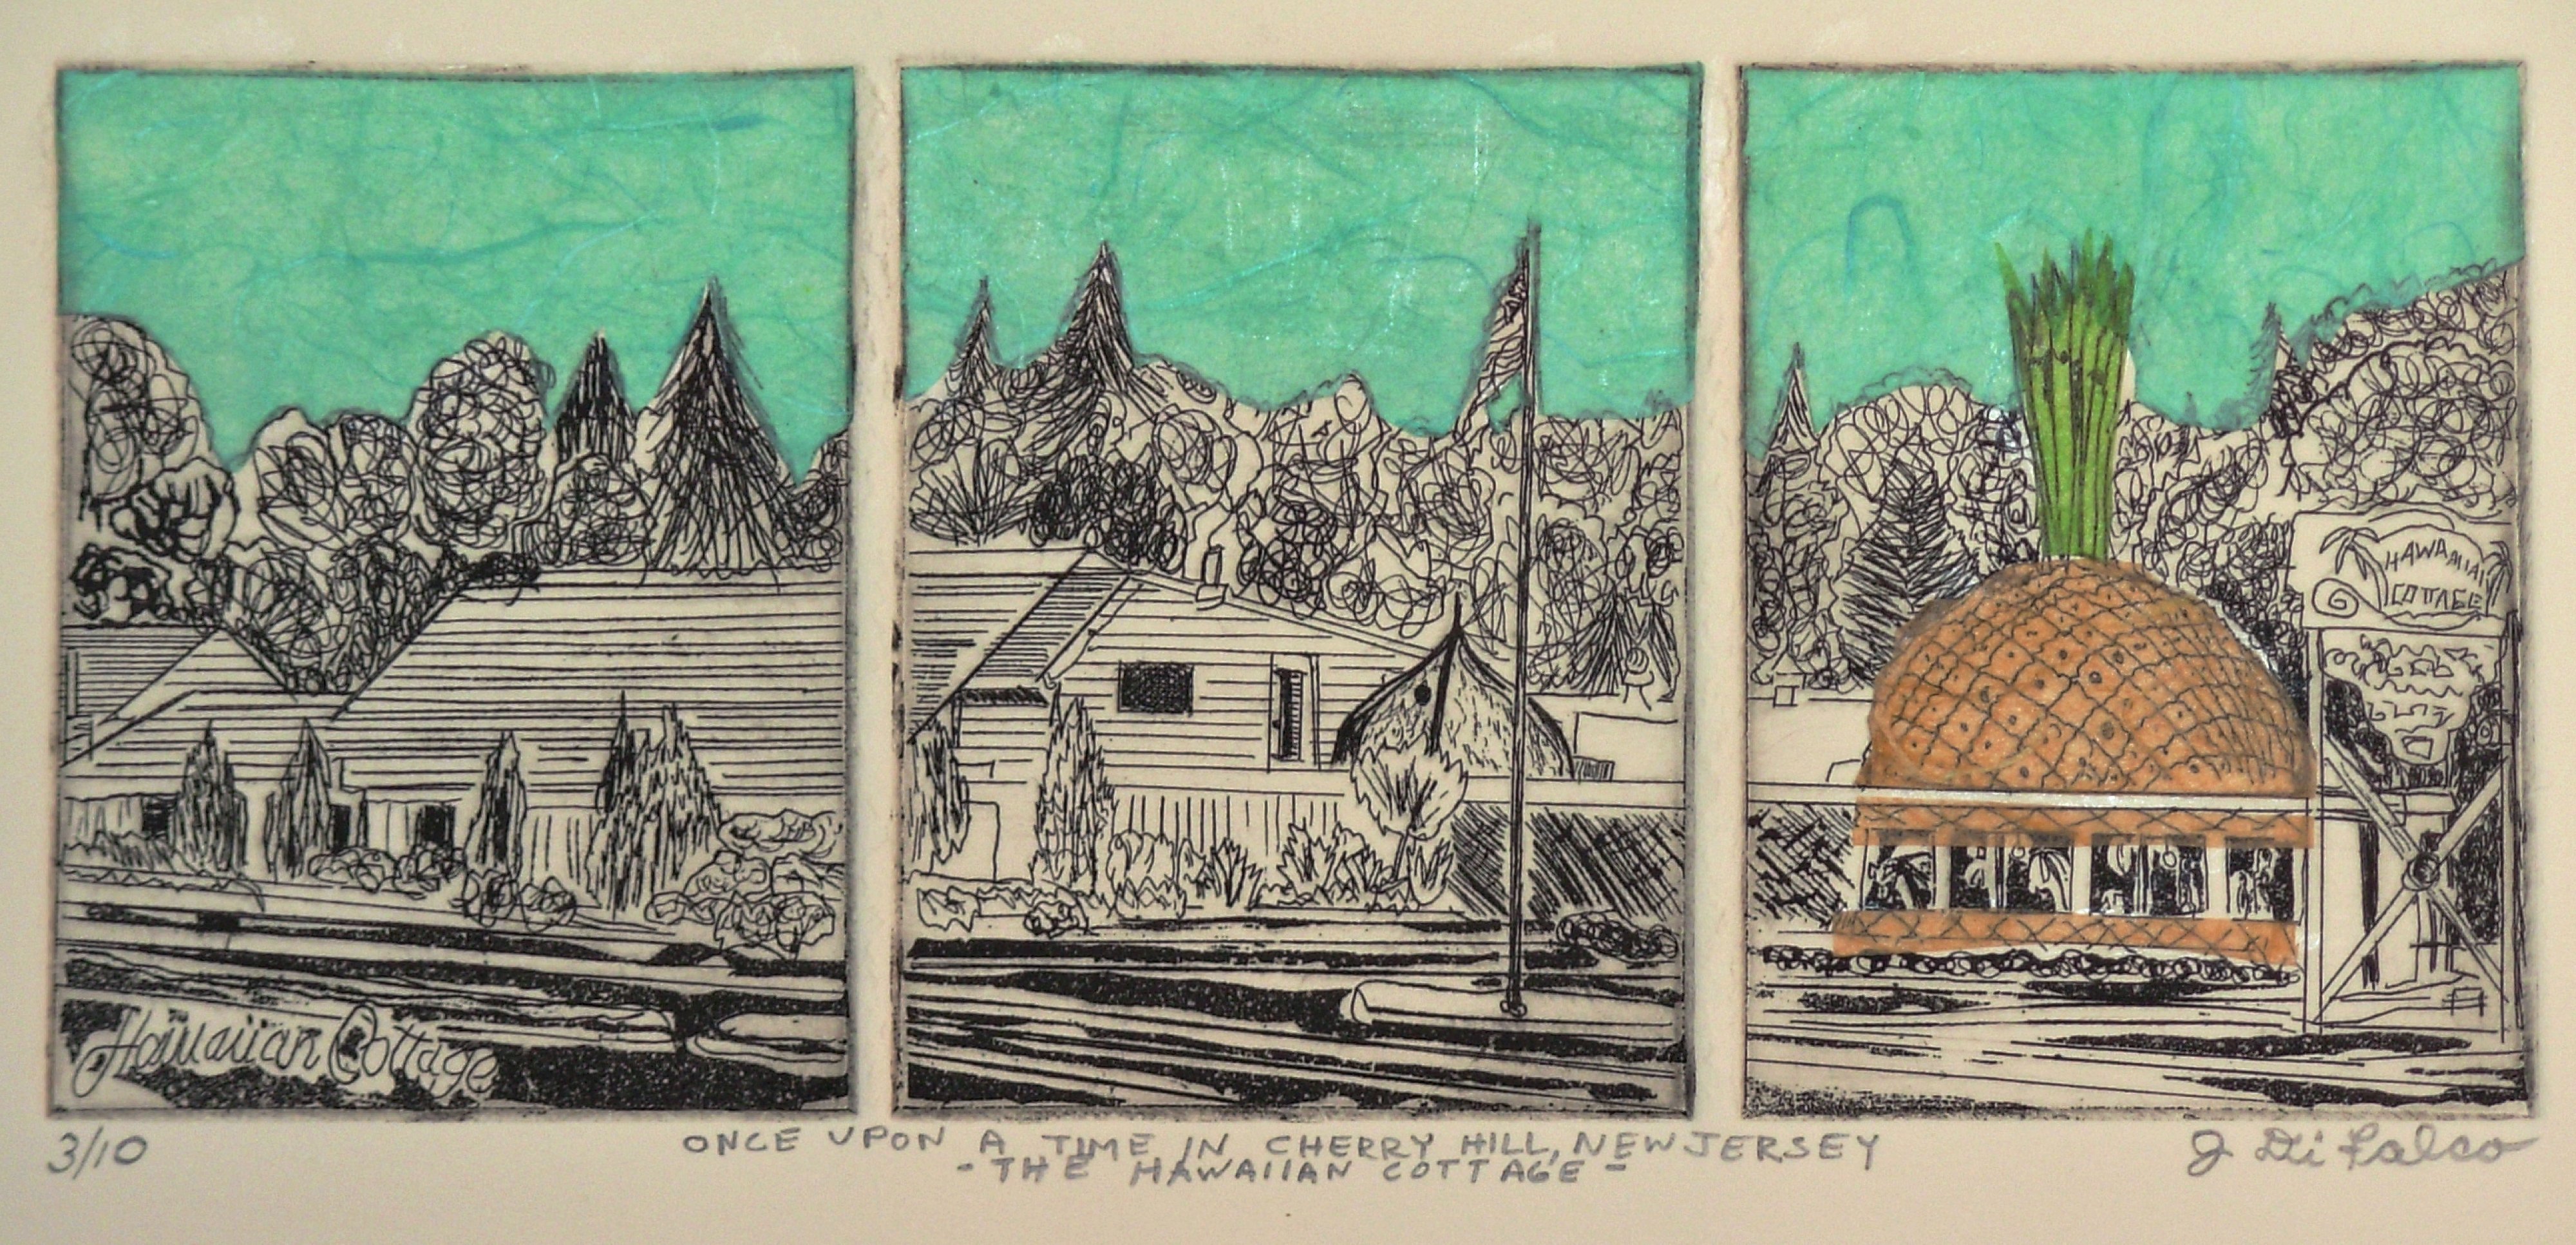 Jerry  Di Falco: 'THE HAWAIIAN COTTAGE', 2014 Etching, Landmarks. Title ONCE UPON A TIME IN CHERRY HILL, NEW JERSEY, THE HAWAIIAN COTTAGE. Please note that this etching is shipped and sold to the buyer without a frame or mat. This keeps the price low and also allows the collector a choice in framing. The etching is shipped in a ...